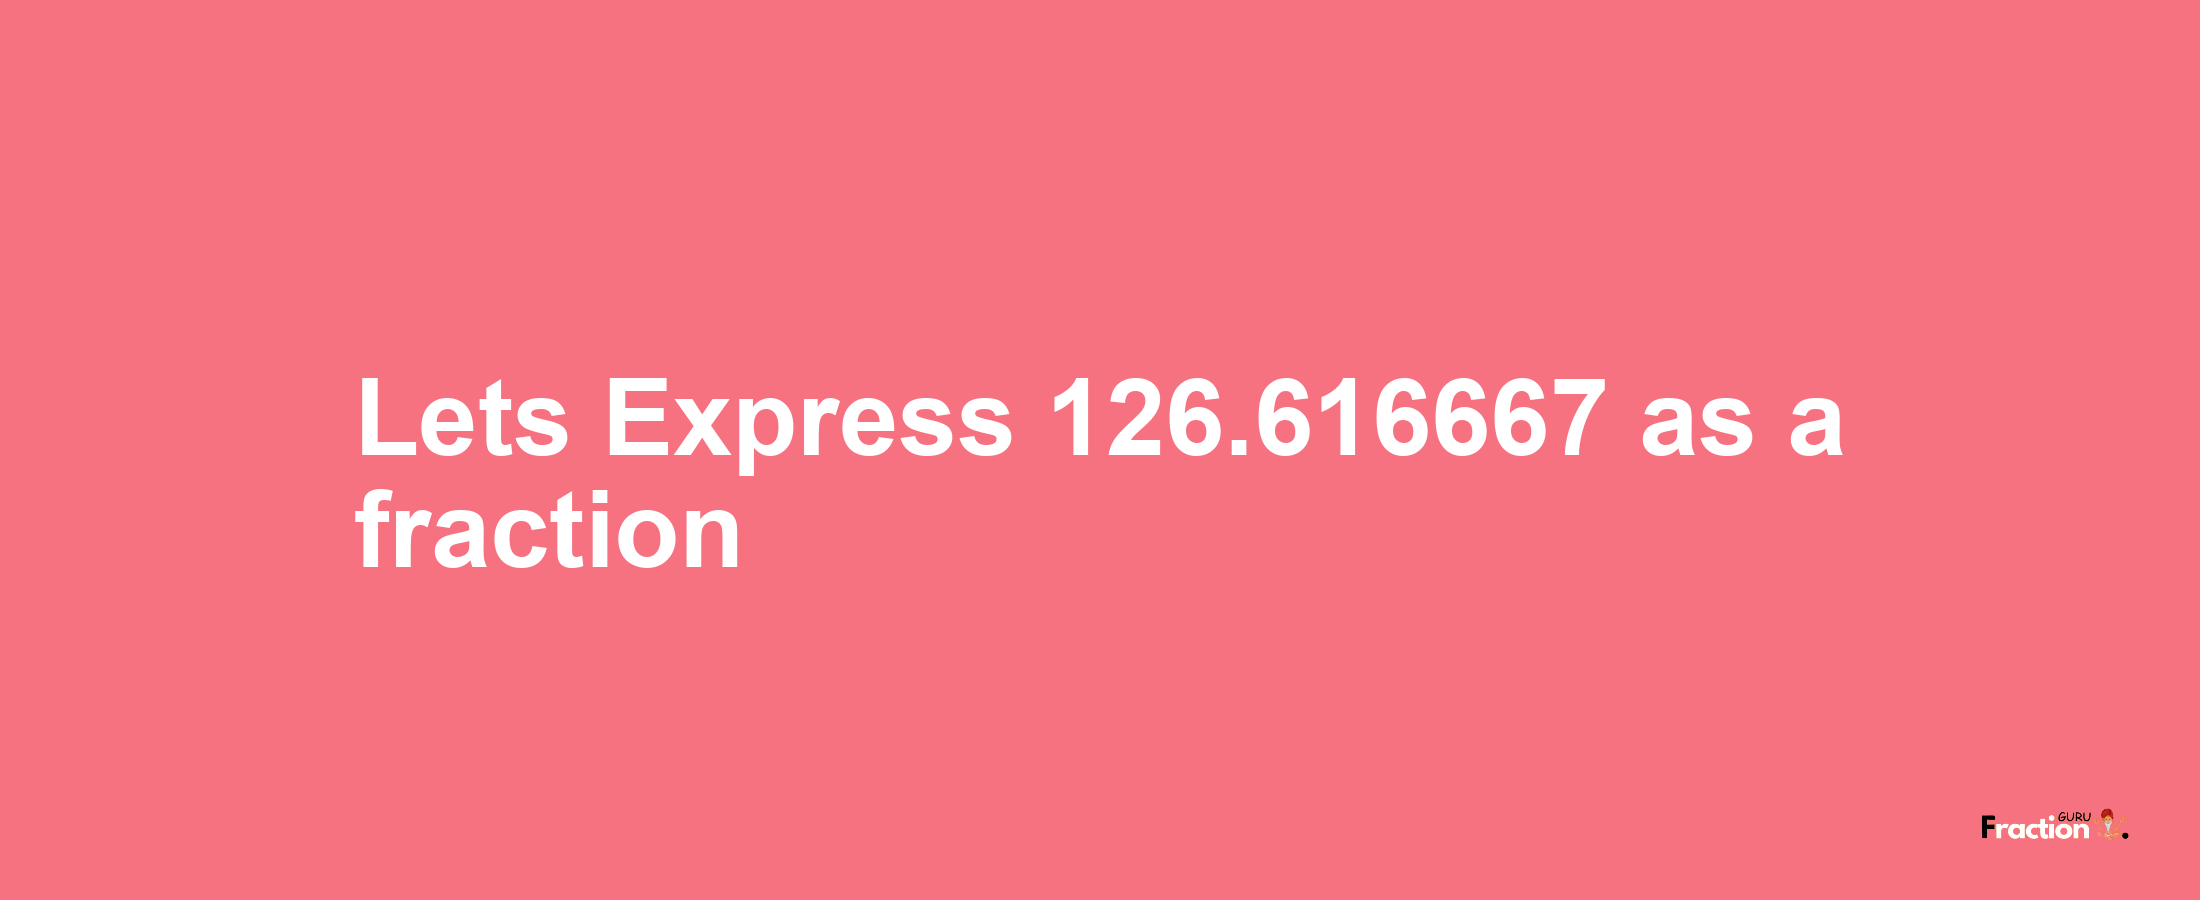 Lets Express 126.616667 as afraction